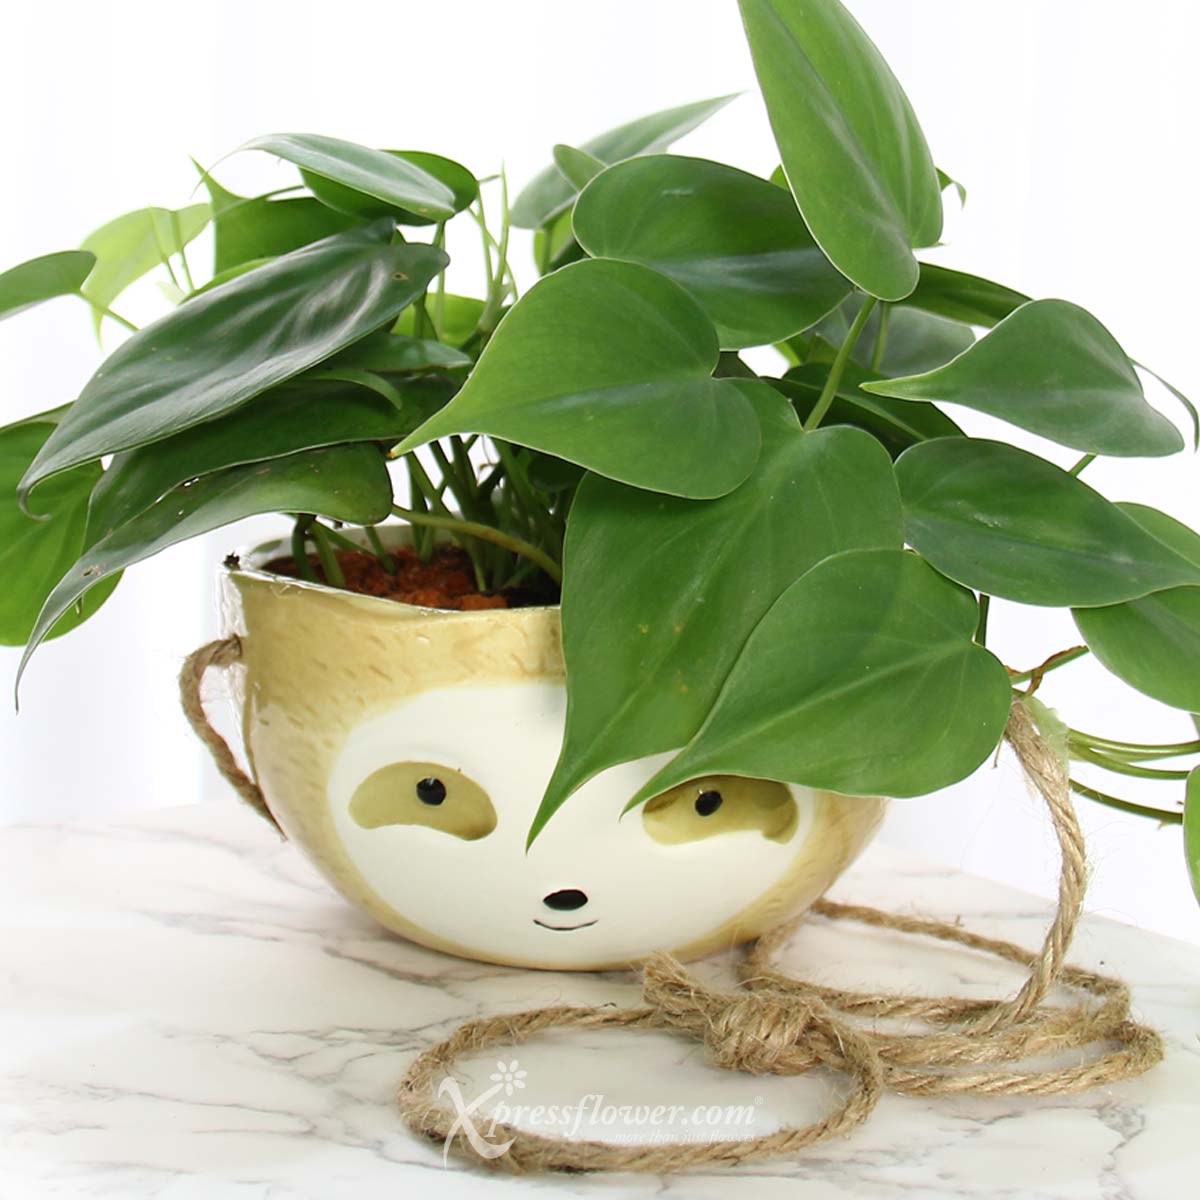 PS2118 Mr Cool Sloth (Philodendron Scandens Plant) 1b